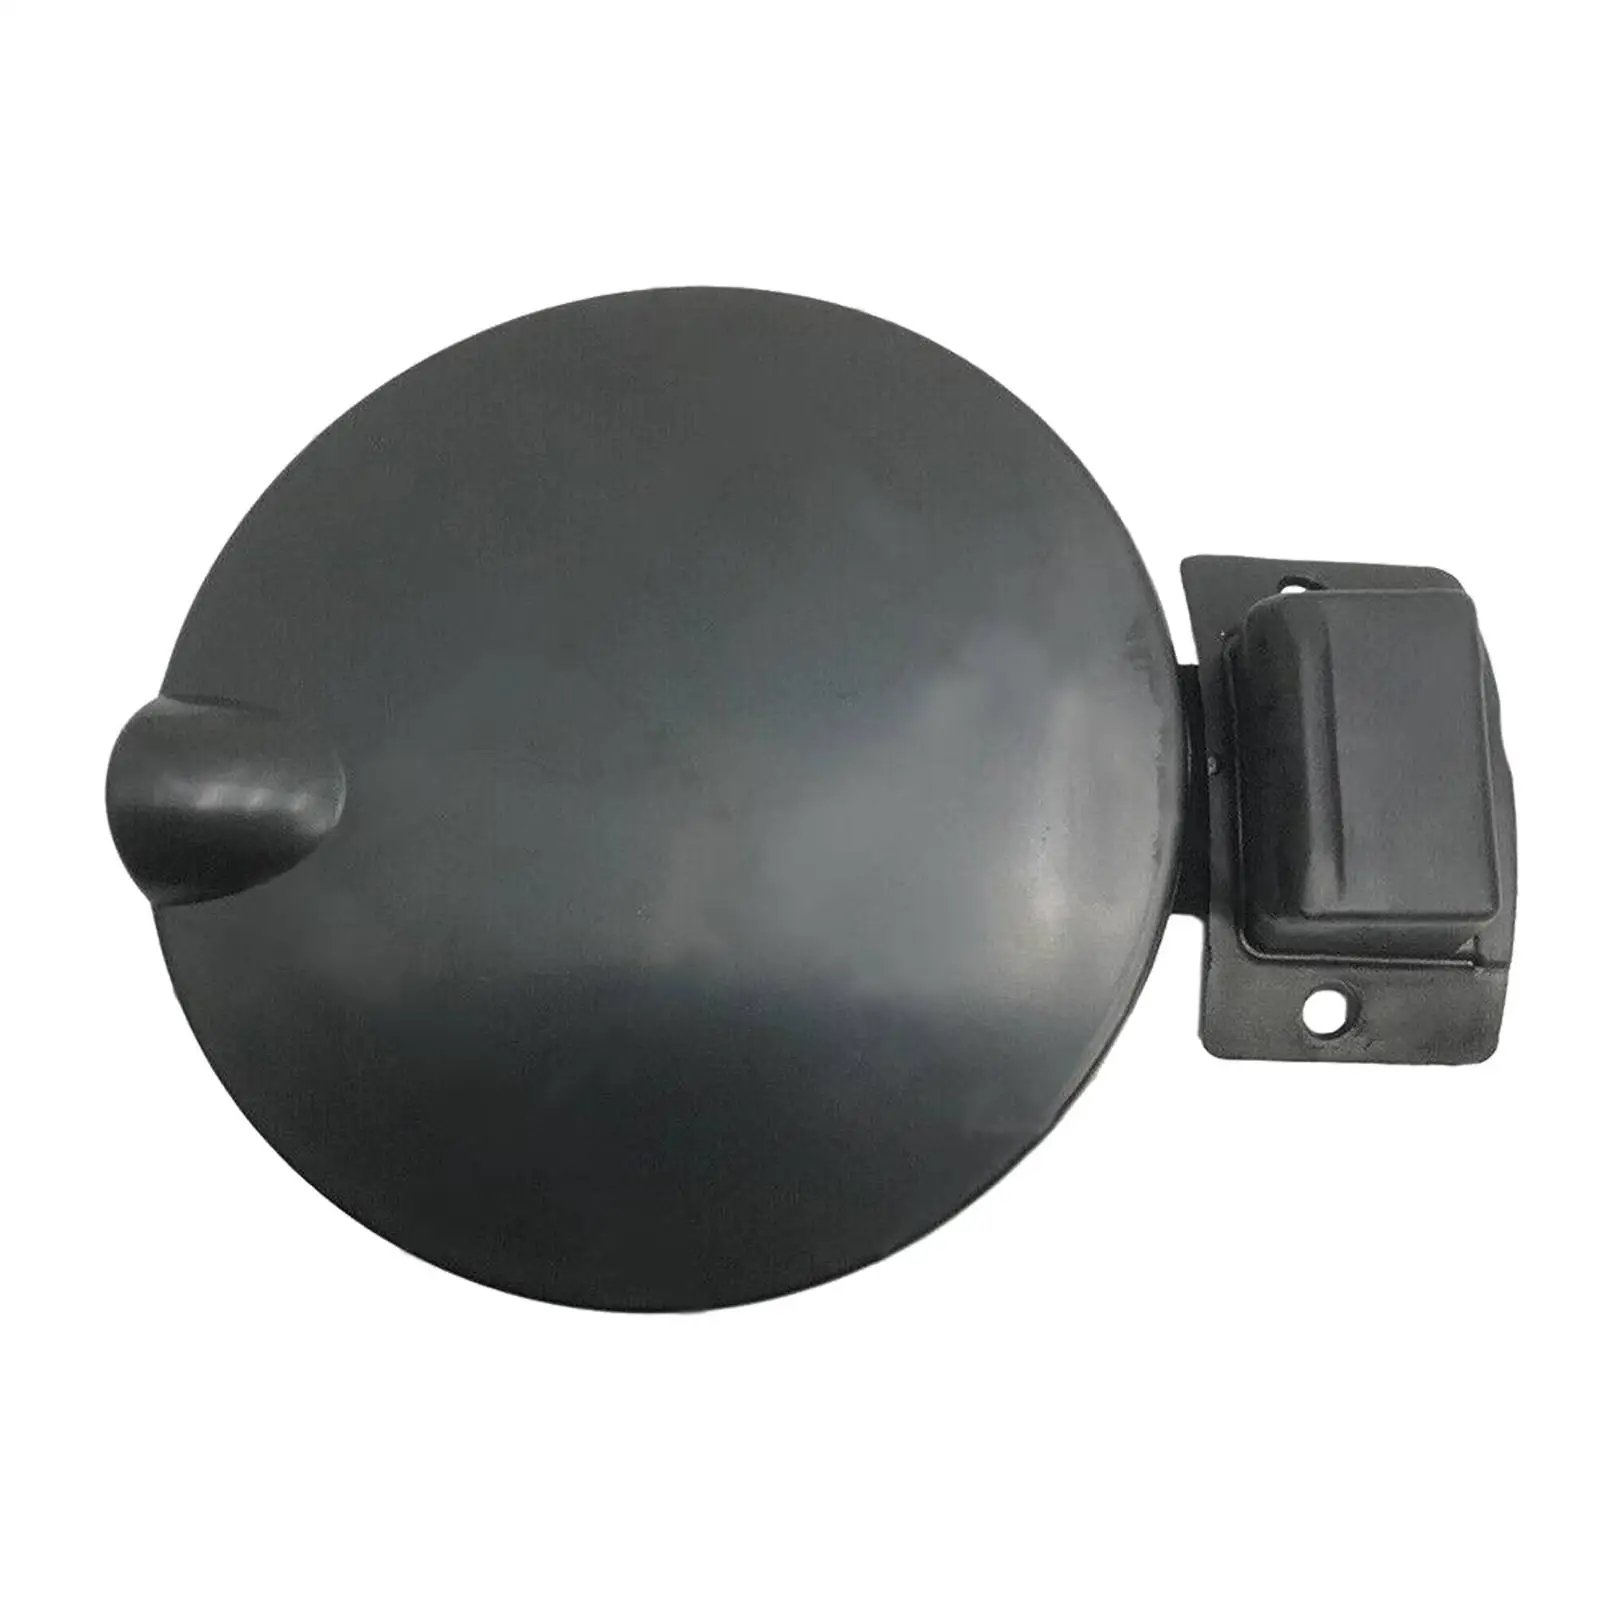 Fuel Filler Cap Fuel Tank Cap Fuel Filler Flap Cover Lid Modification for Holden VU Vy Vz Premium Sturdy Easy to Use